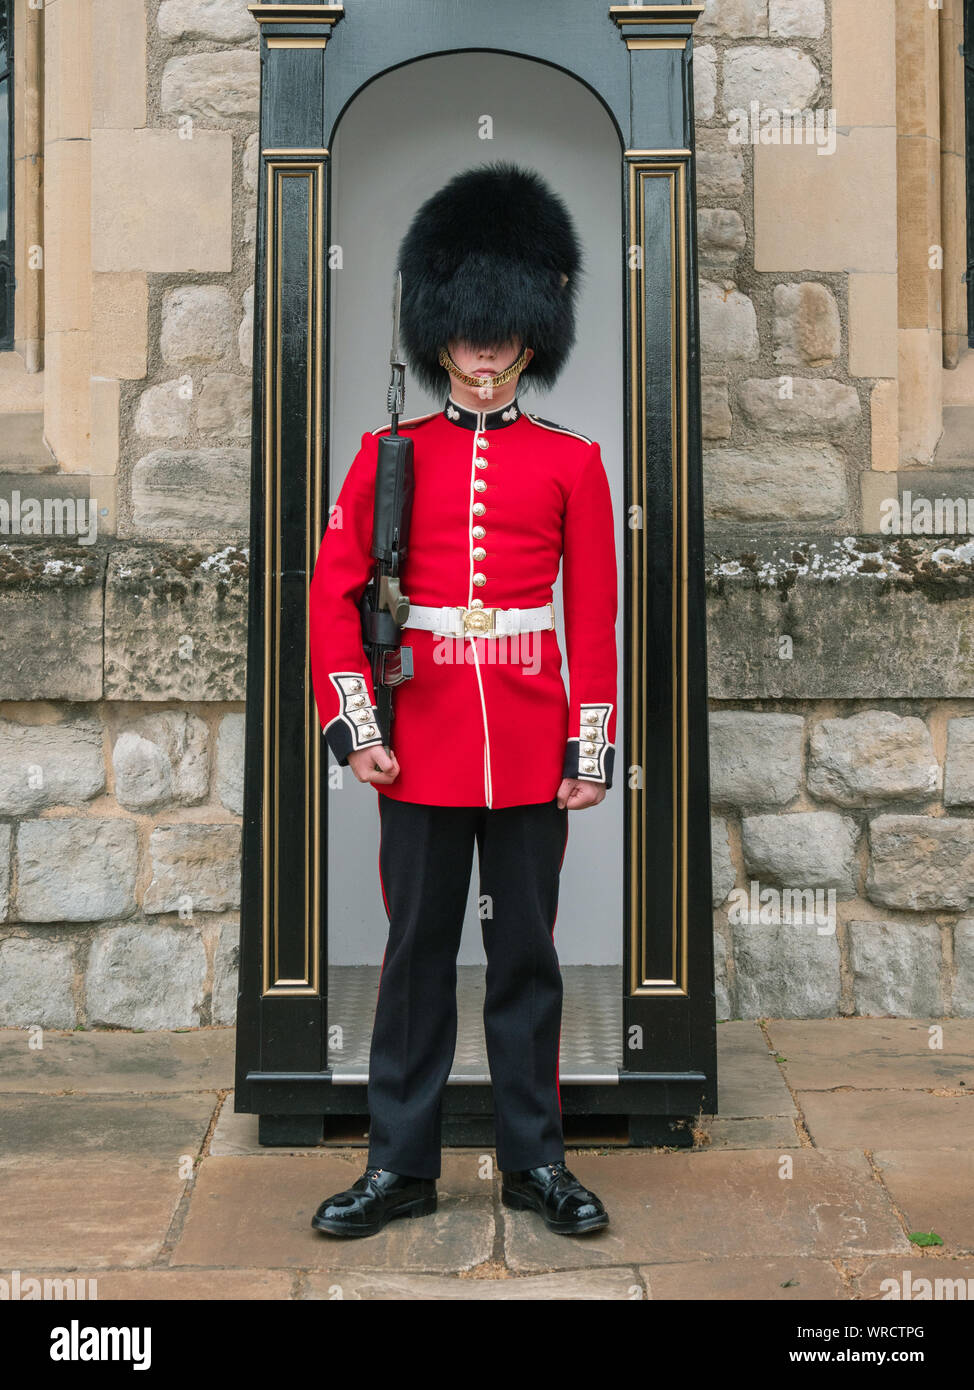 London Uk April 19 Solider Of Tower Of London Soldier Of The English Guard Patrols Inside Tower Of London In The Service Of The Queen Of Engla Stock Photo Alamy